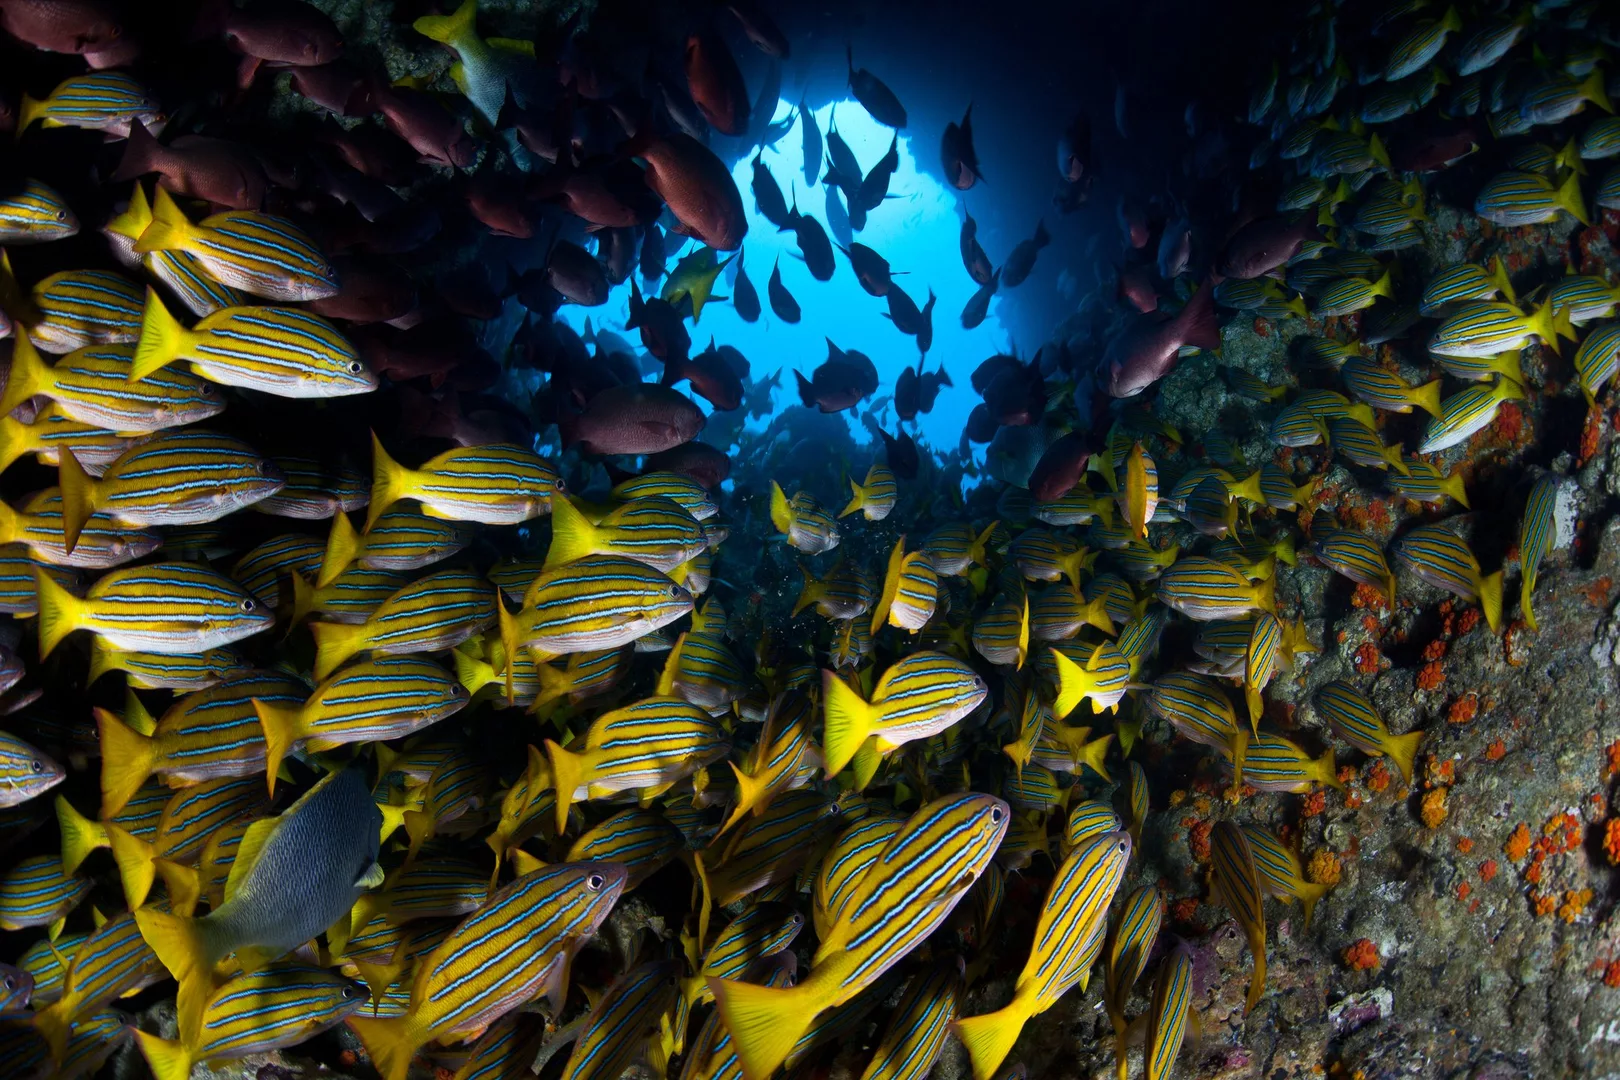 A school of fish swims through a cave in Costa Rica